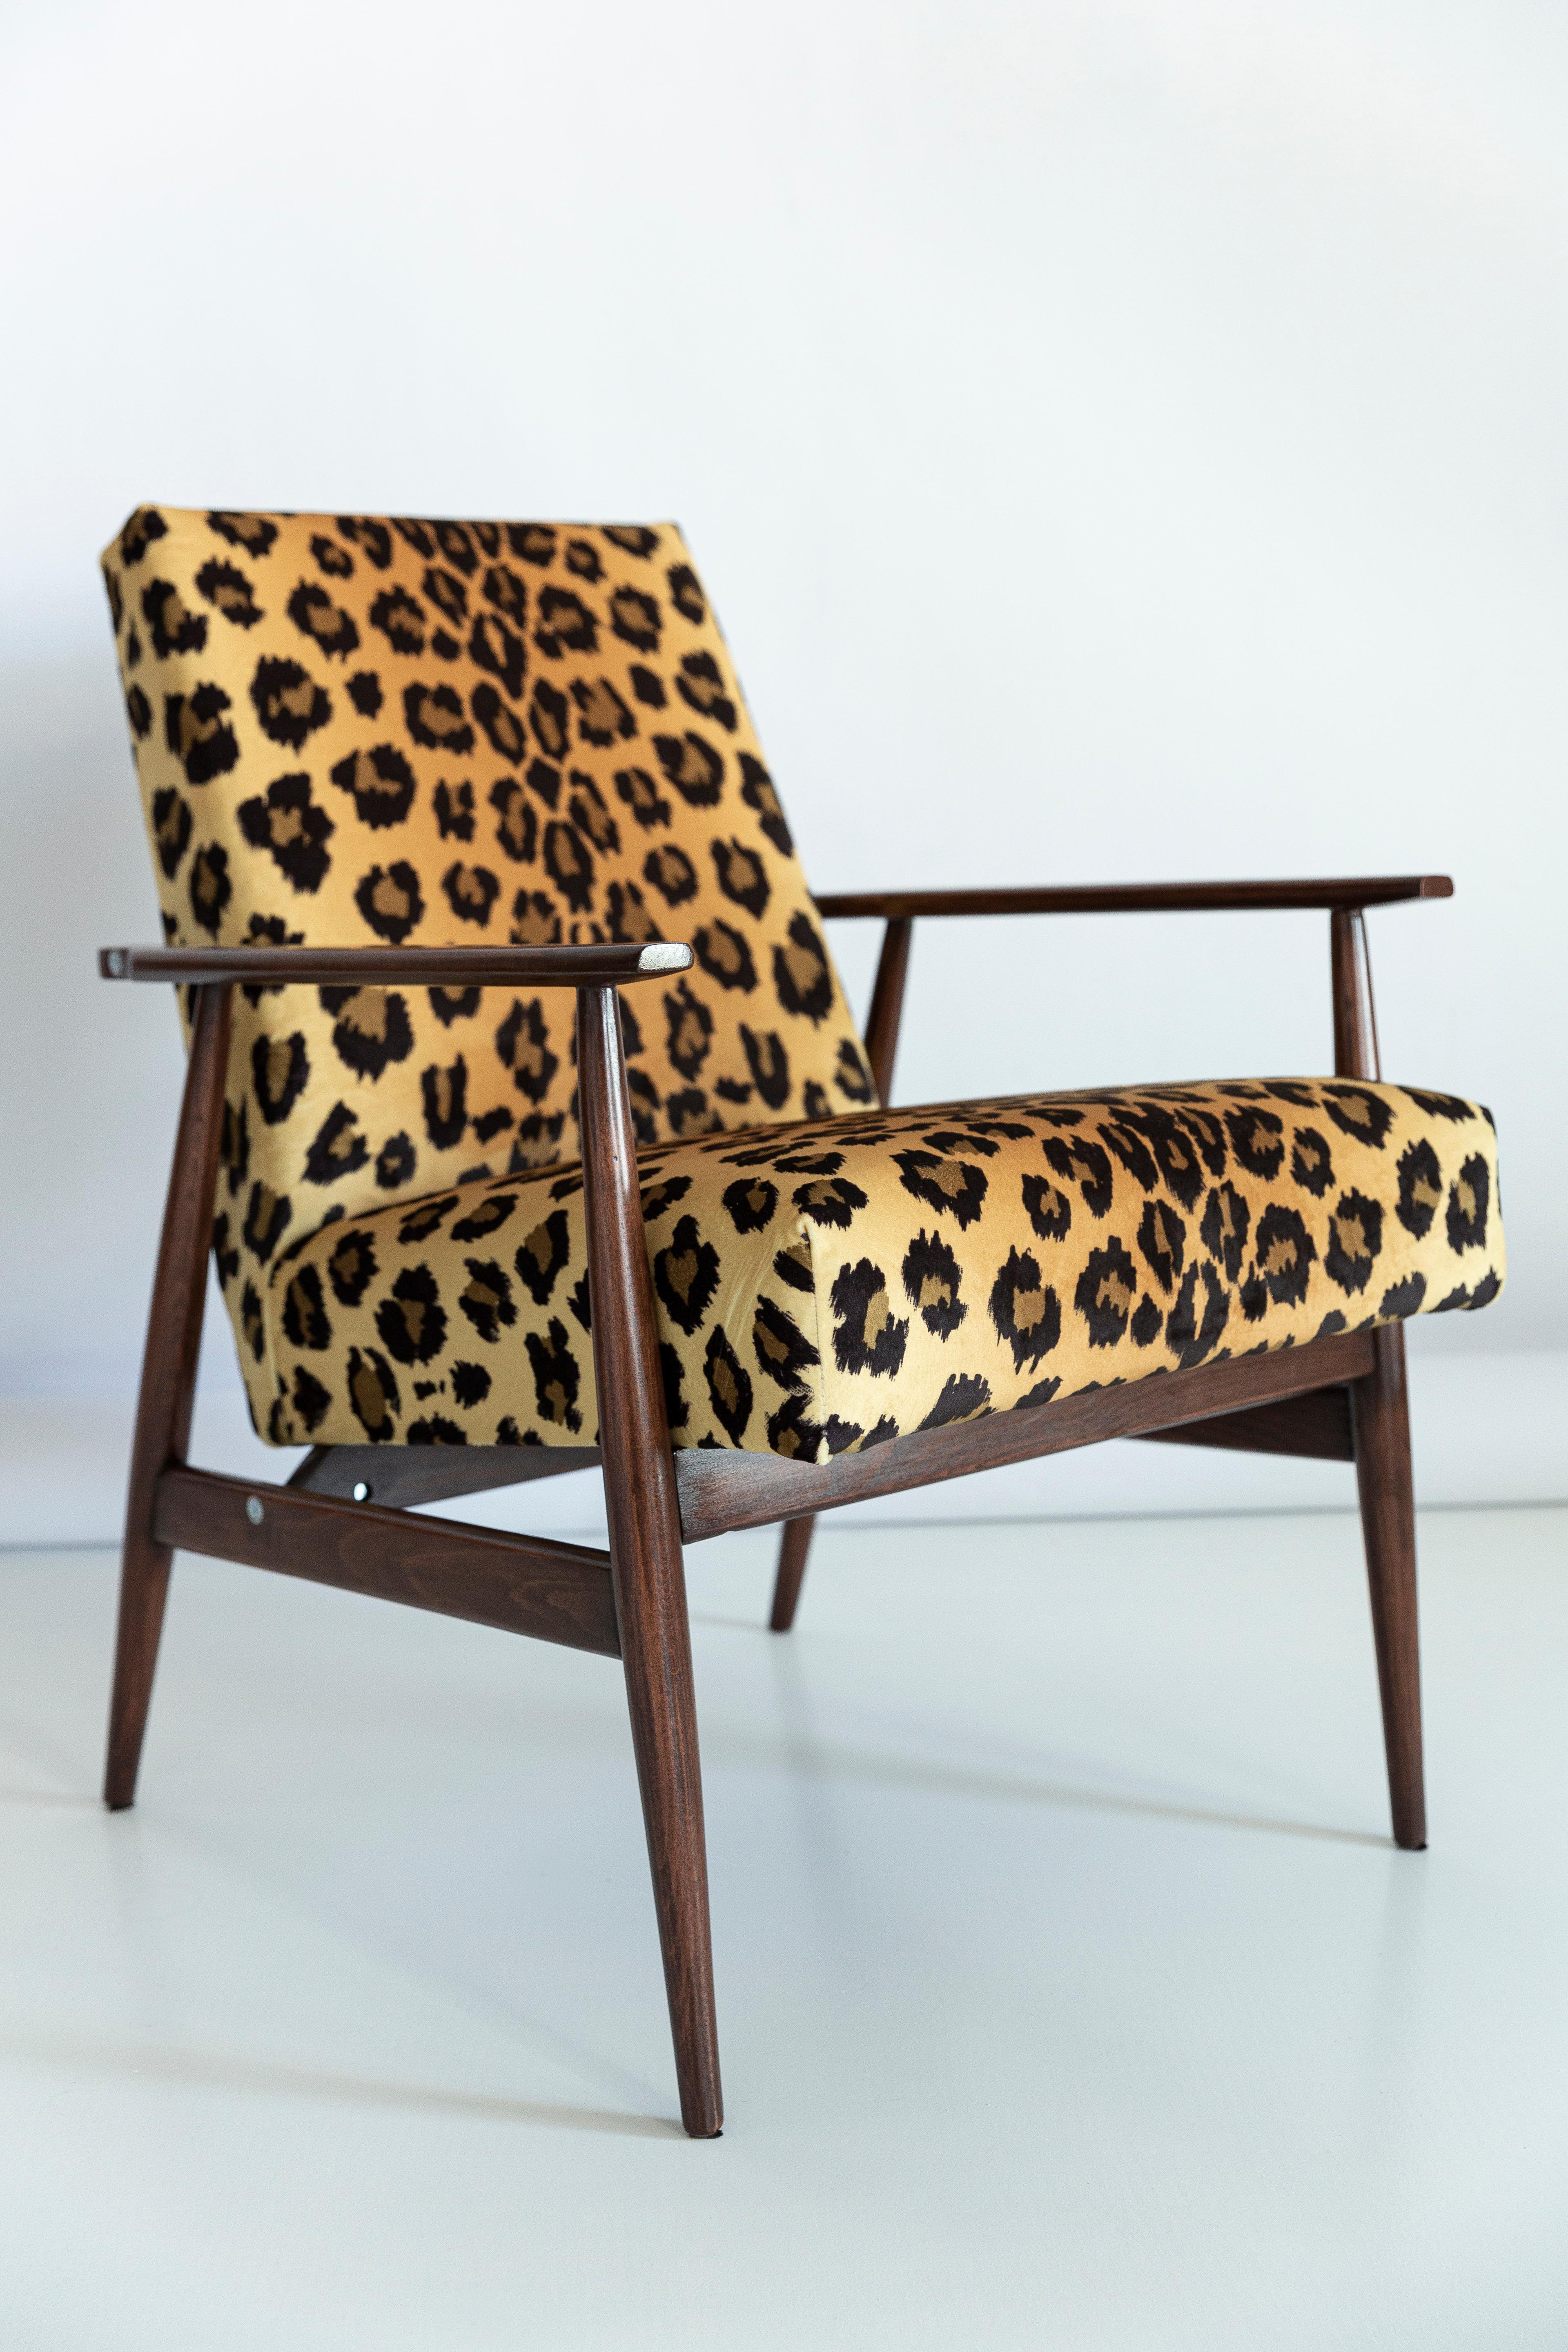 Hand-Crafted Set of Six Midcentury Leopard Print Velvet Dante Armchairs, H. Lis, 1960s For Sale